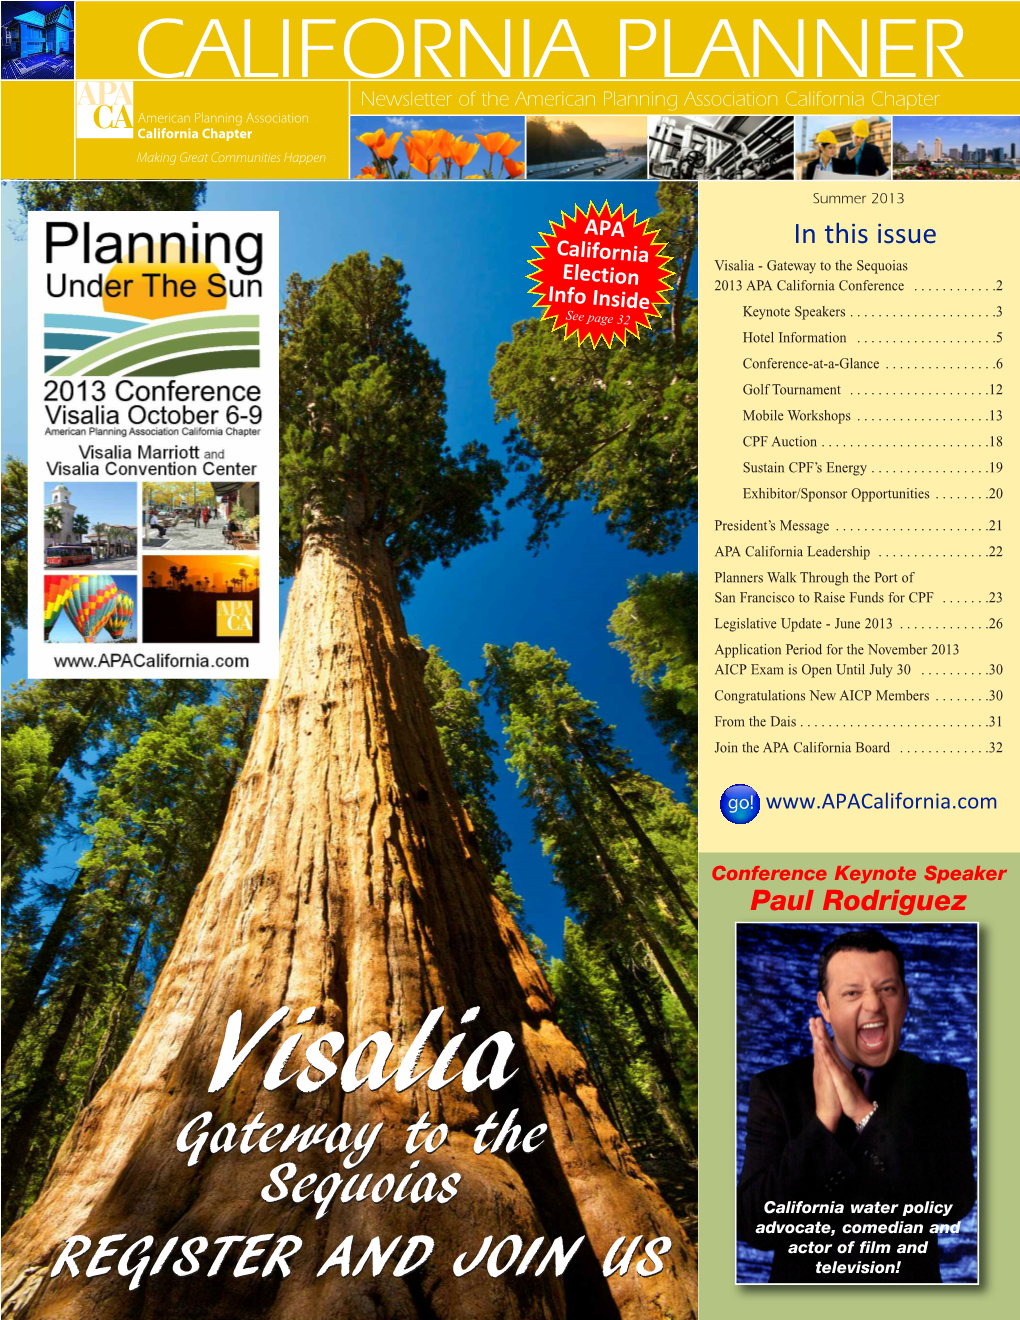 Summer 2013 APA in This Issue California Visalia - Gateway to the Sequoias Election 2013 APA California Conference